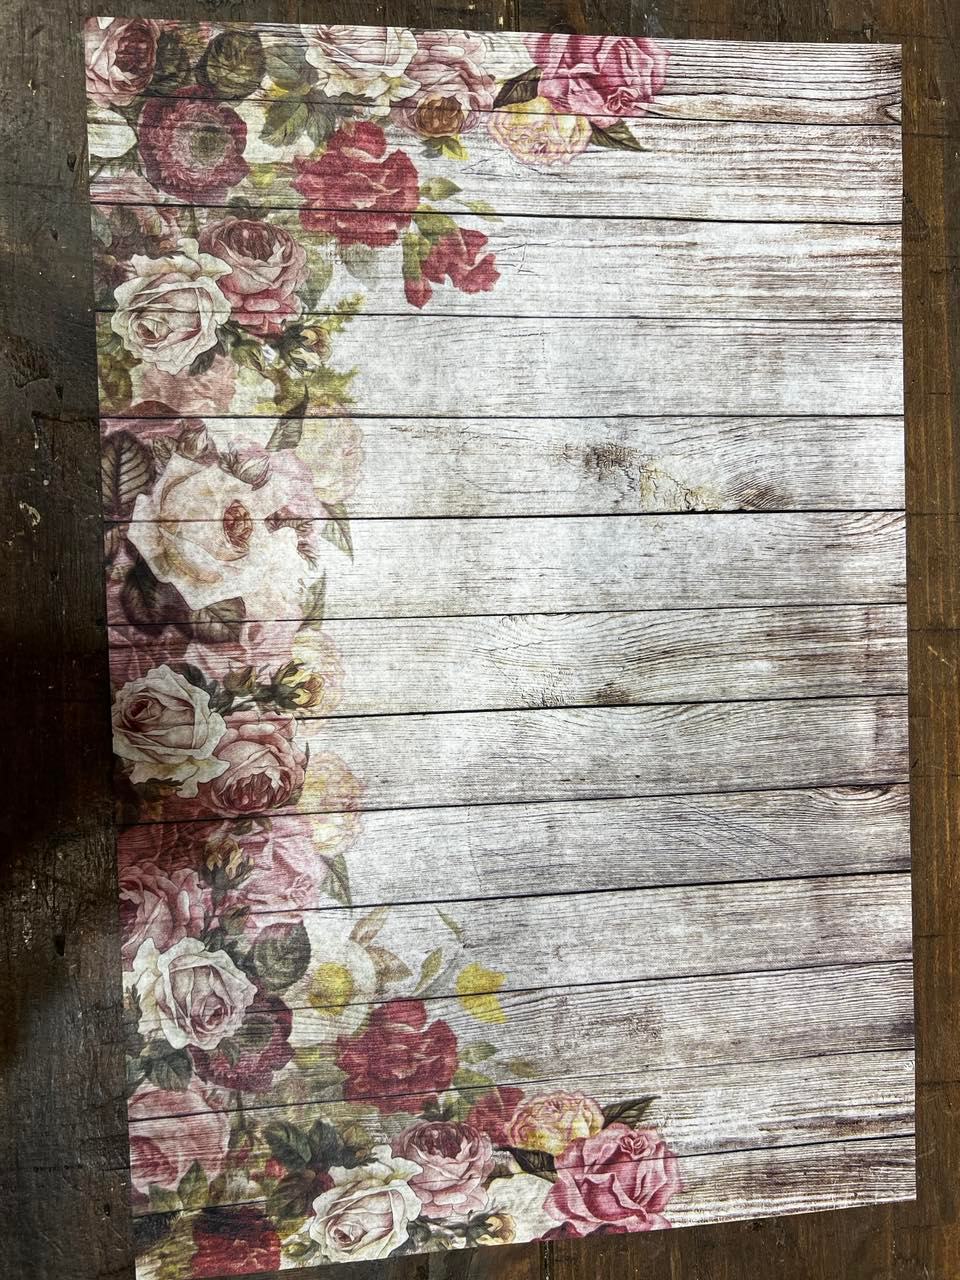 BARNWOOD & FLORAL | Re.defined For You